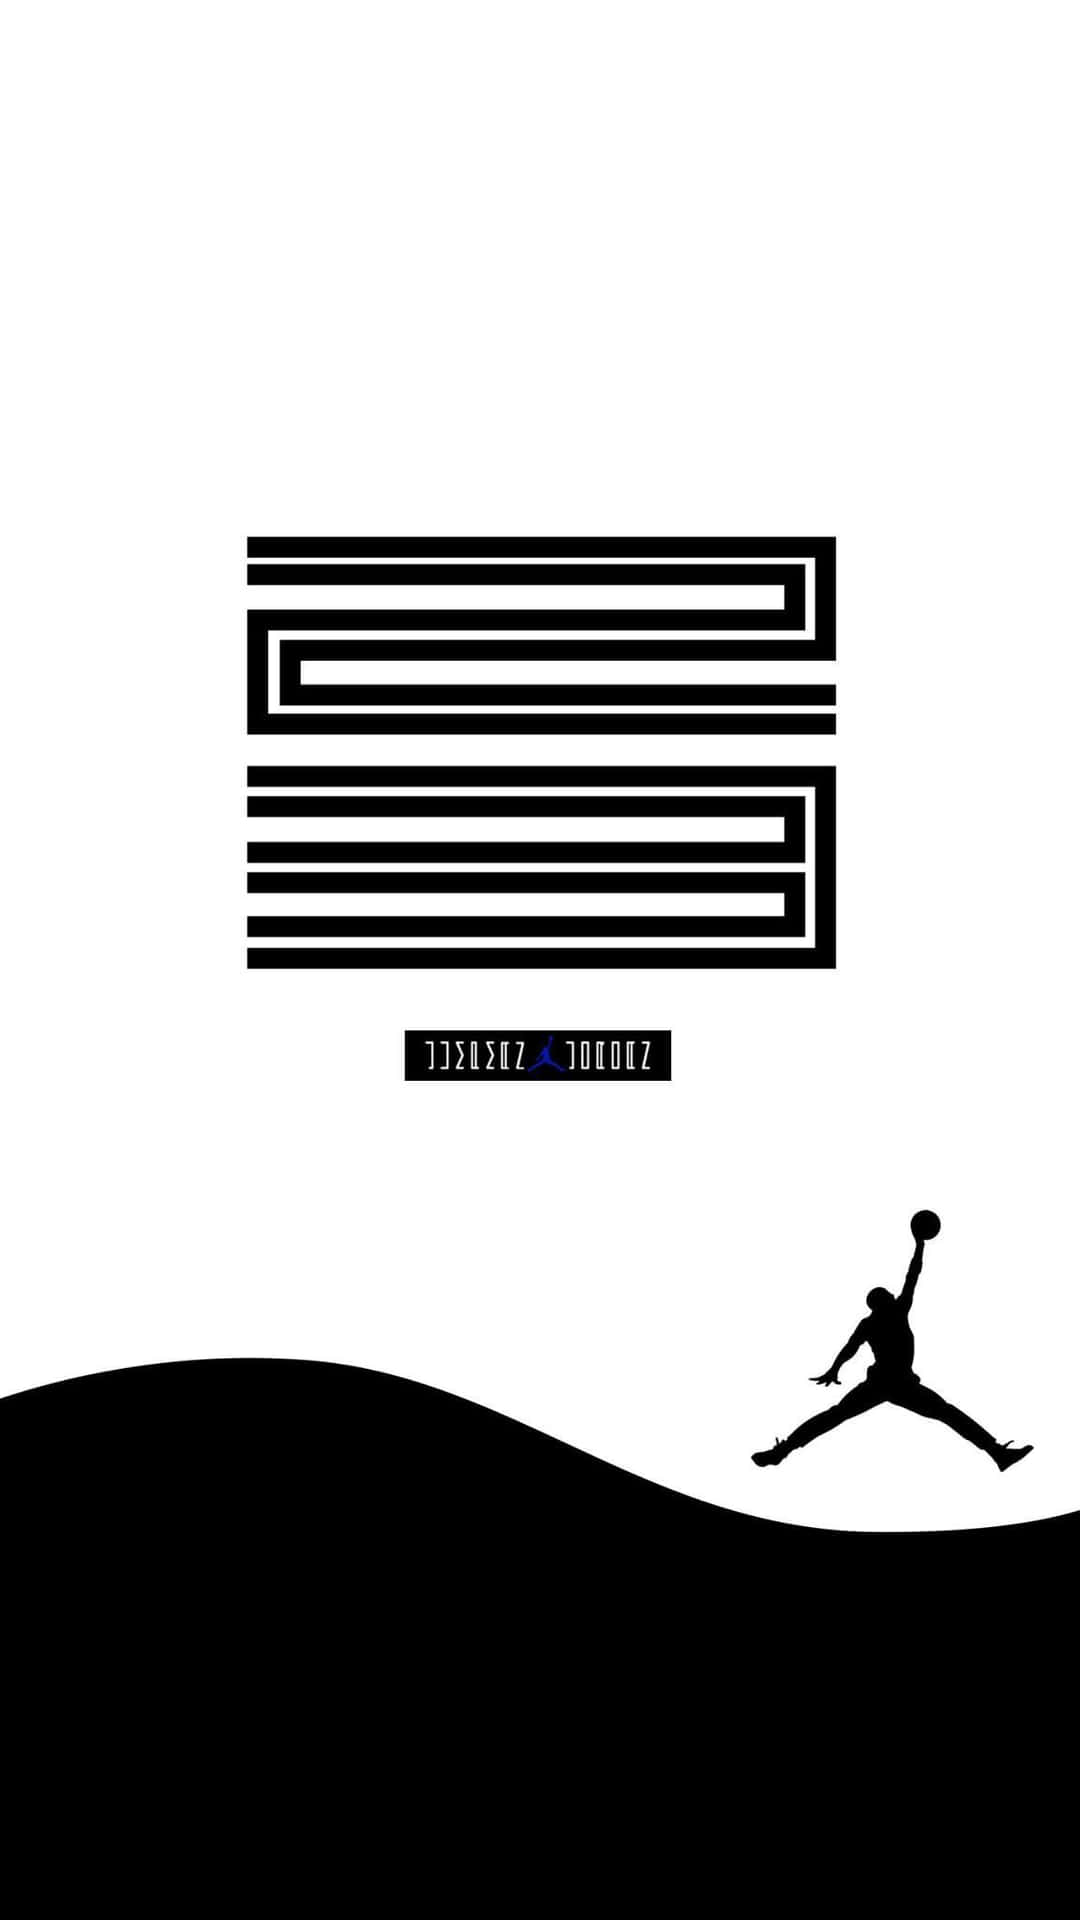 Show Off Your Love of Basketball with The Jordan Logo Phone Wallpaper